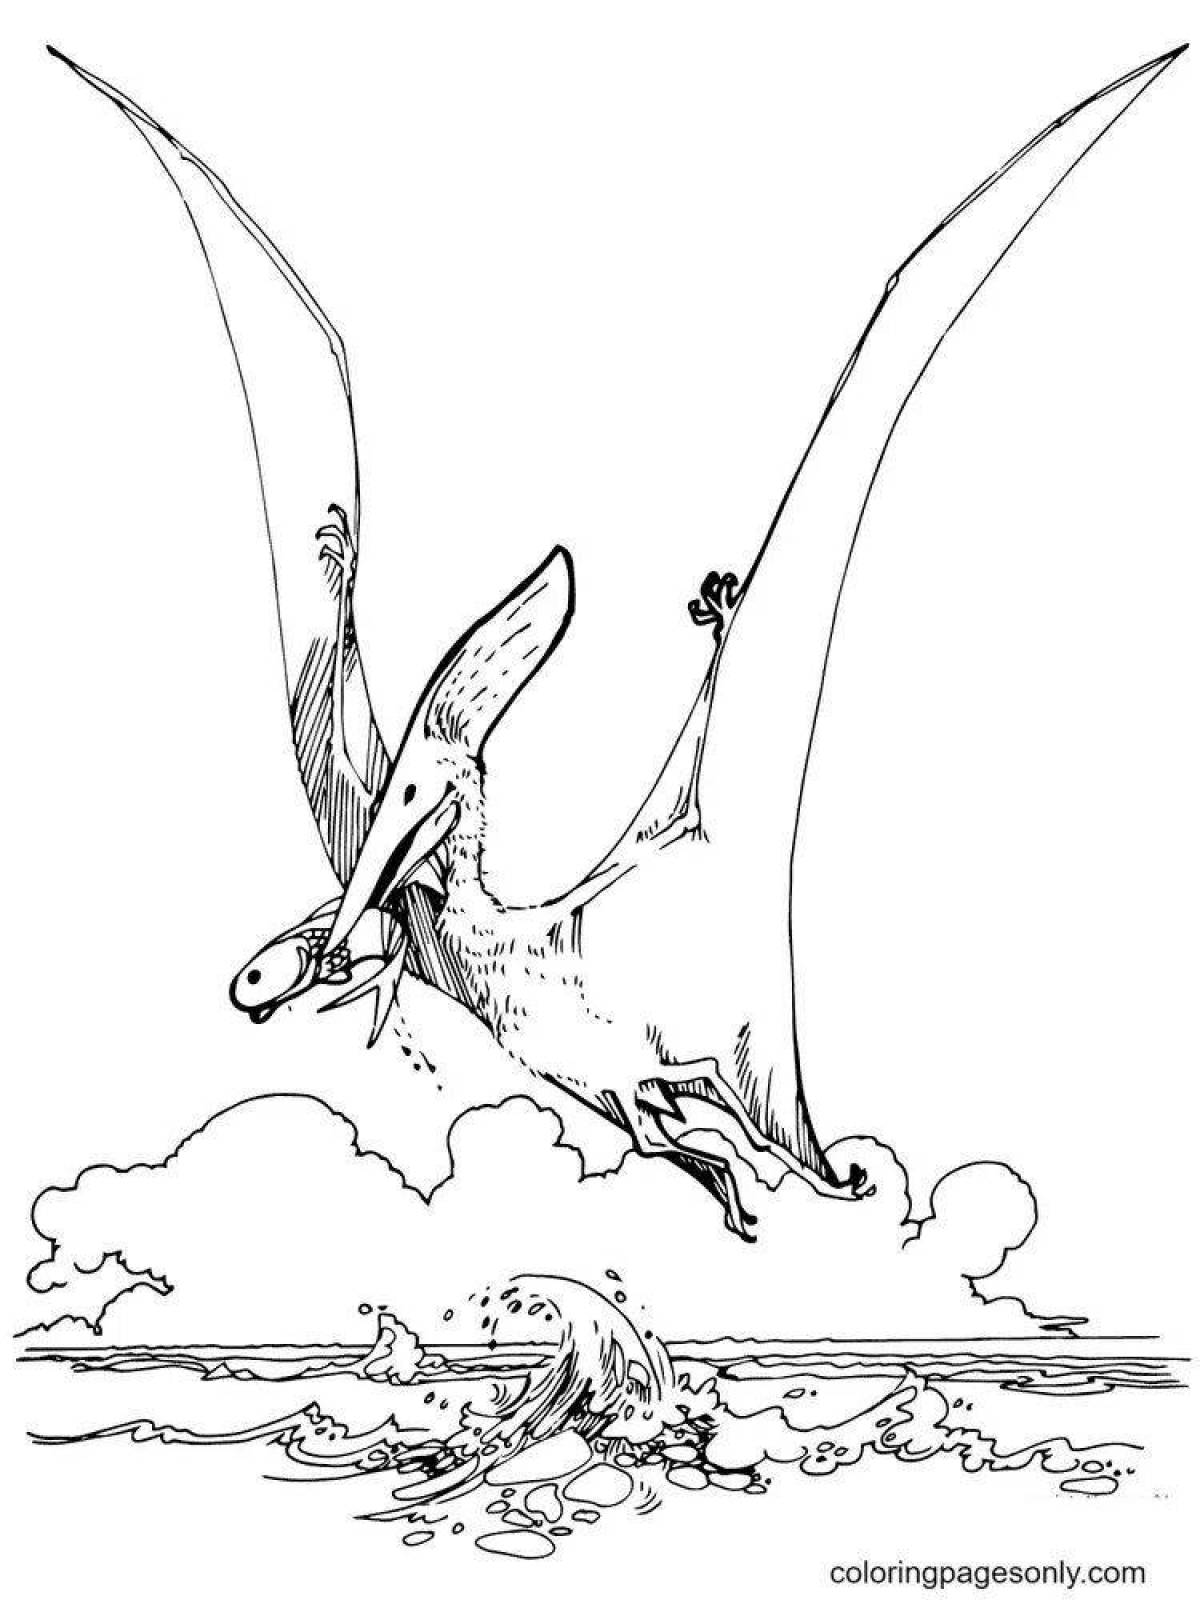 Fairy flying dinosaur coloring page